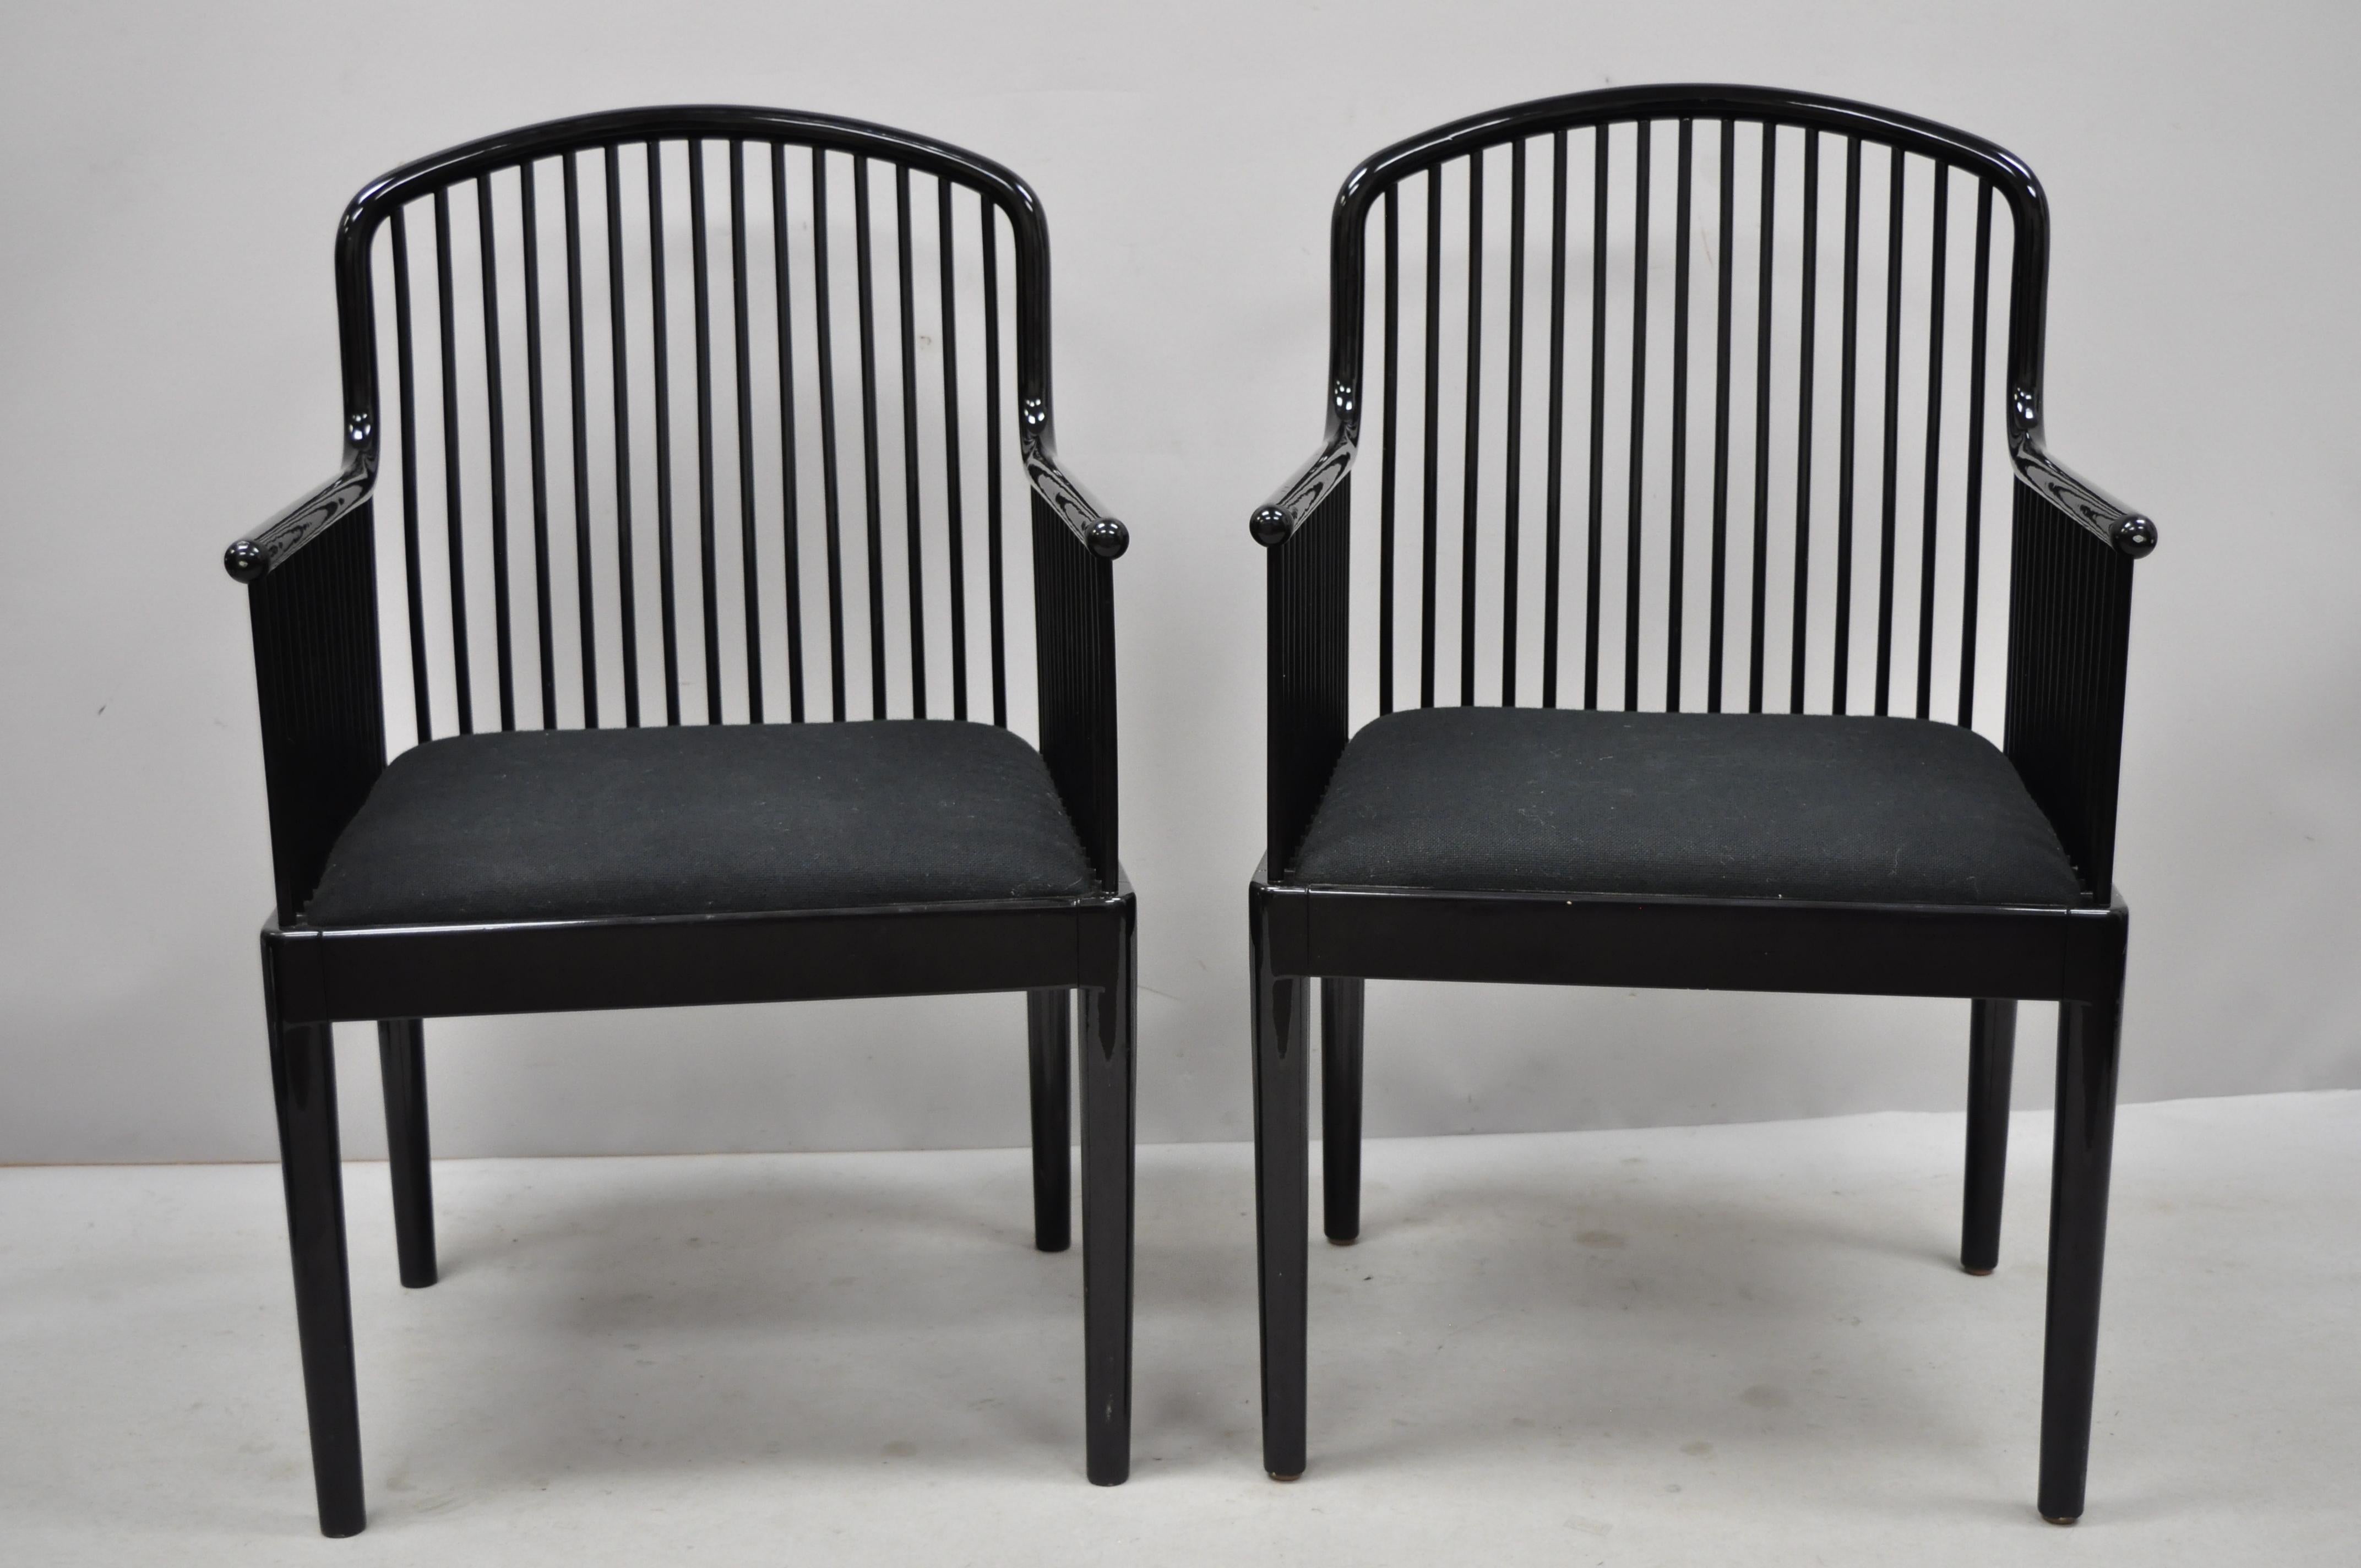 Pair of black lacquer modern Andover armchairs by Davis Allen for Stendig (B). Item includes a black lacquer finish, solid wood frame, original label, very nice vintage item, clean modernist lines, circa late 20th century. Measurements: 36.5